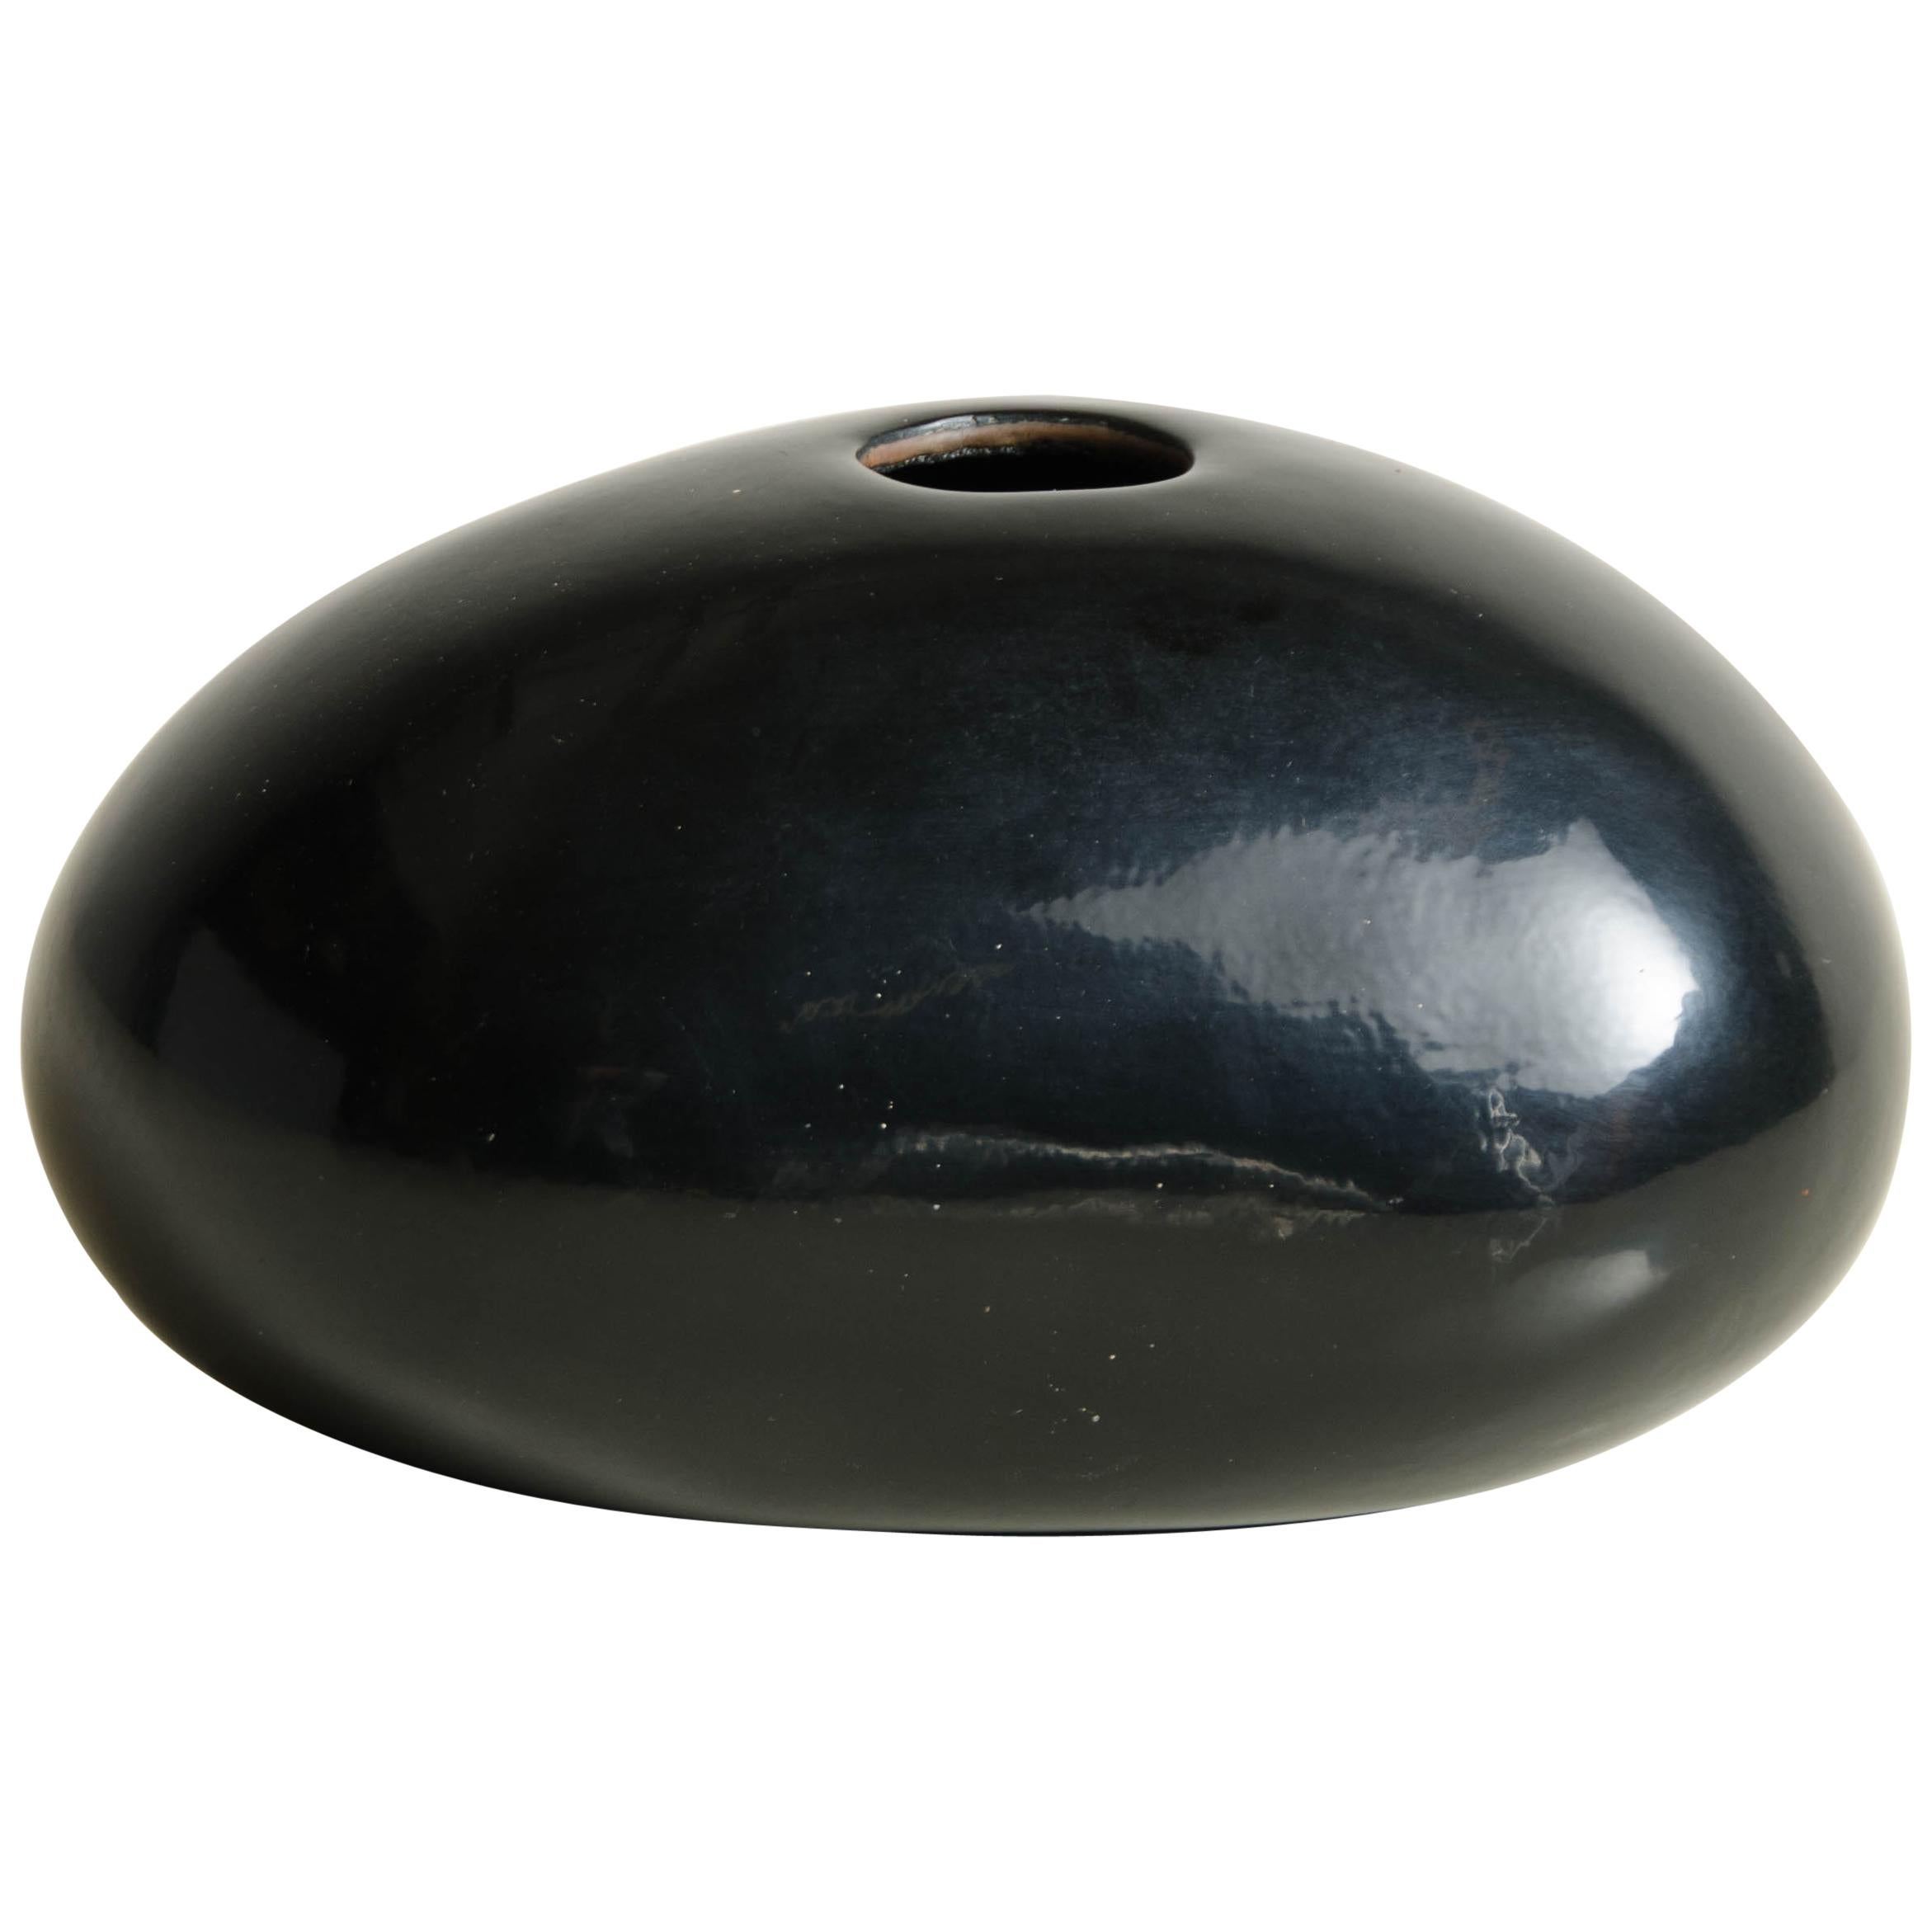 Rock Bud Vase, Short, Black Lacquer by Robert Kuo, Handmade, Limited Edition For Sale